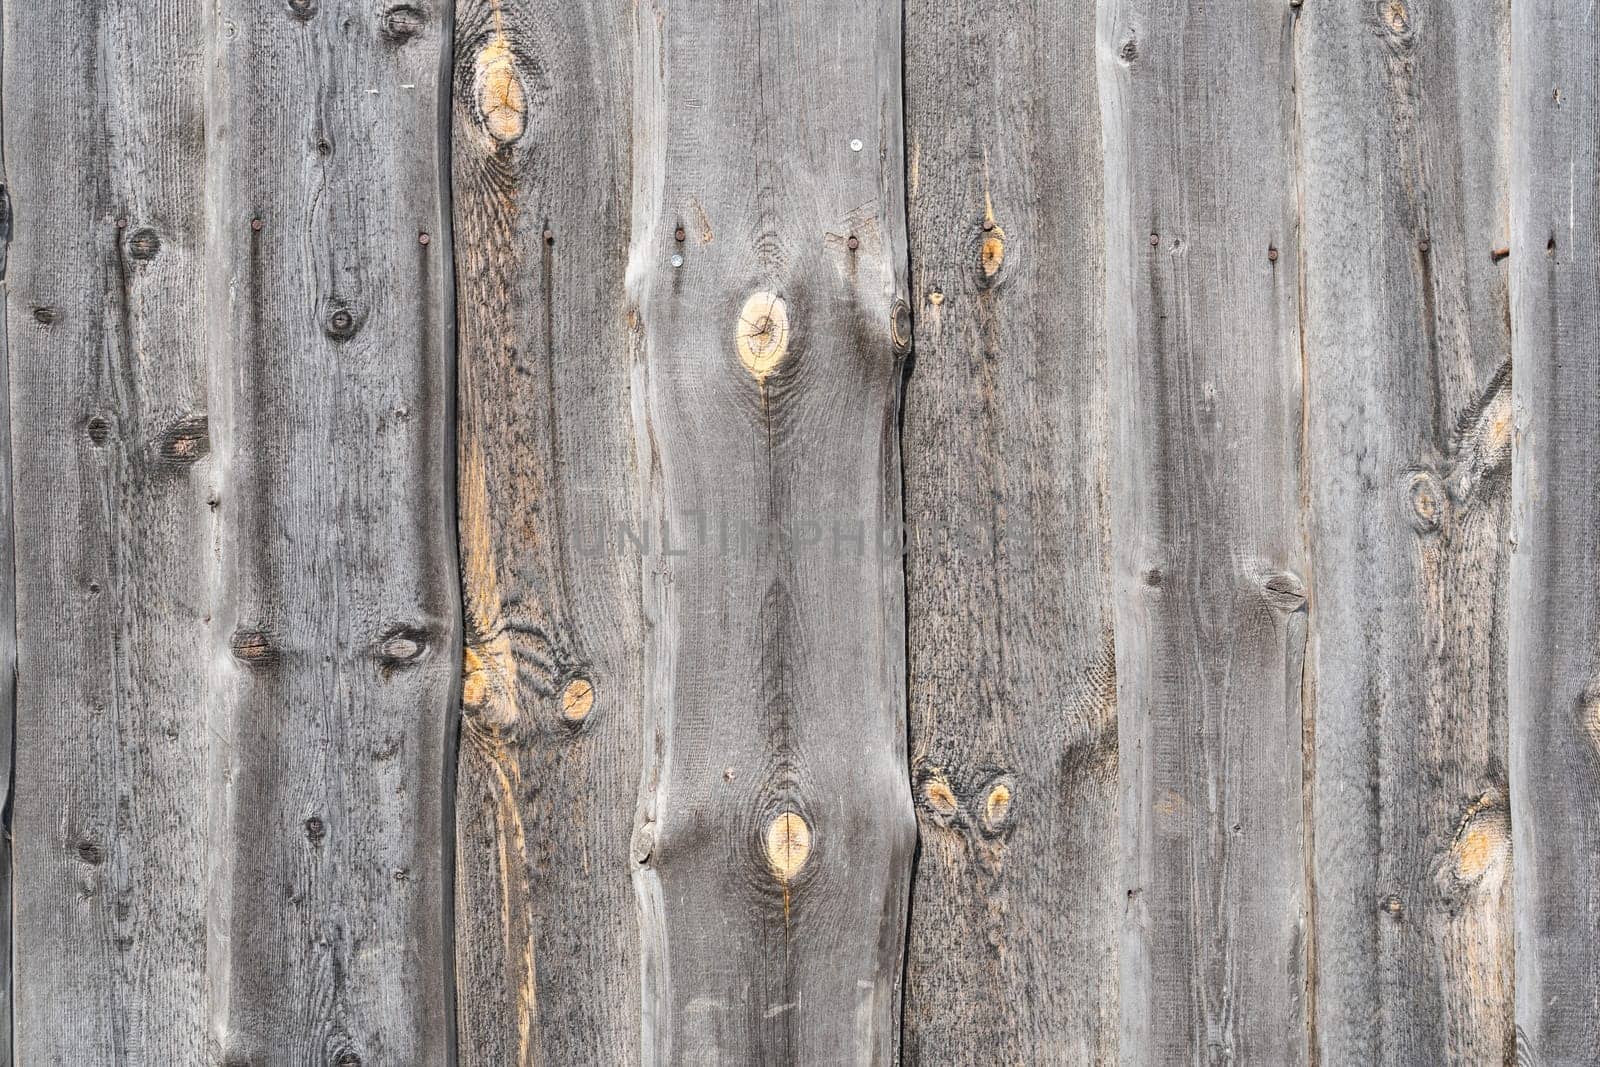 Wooden barn wall made of boards